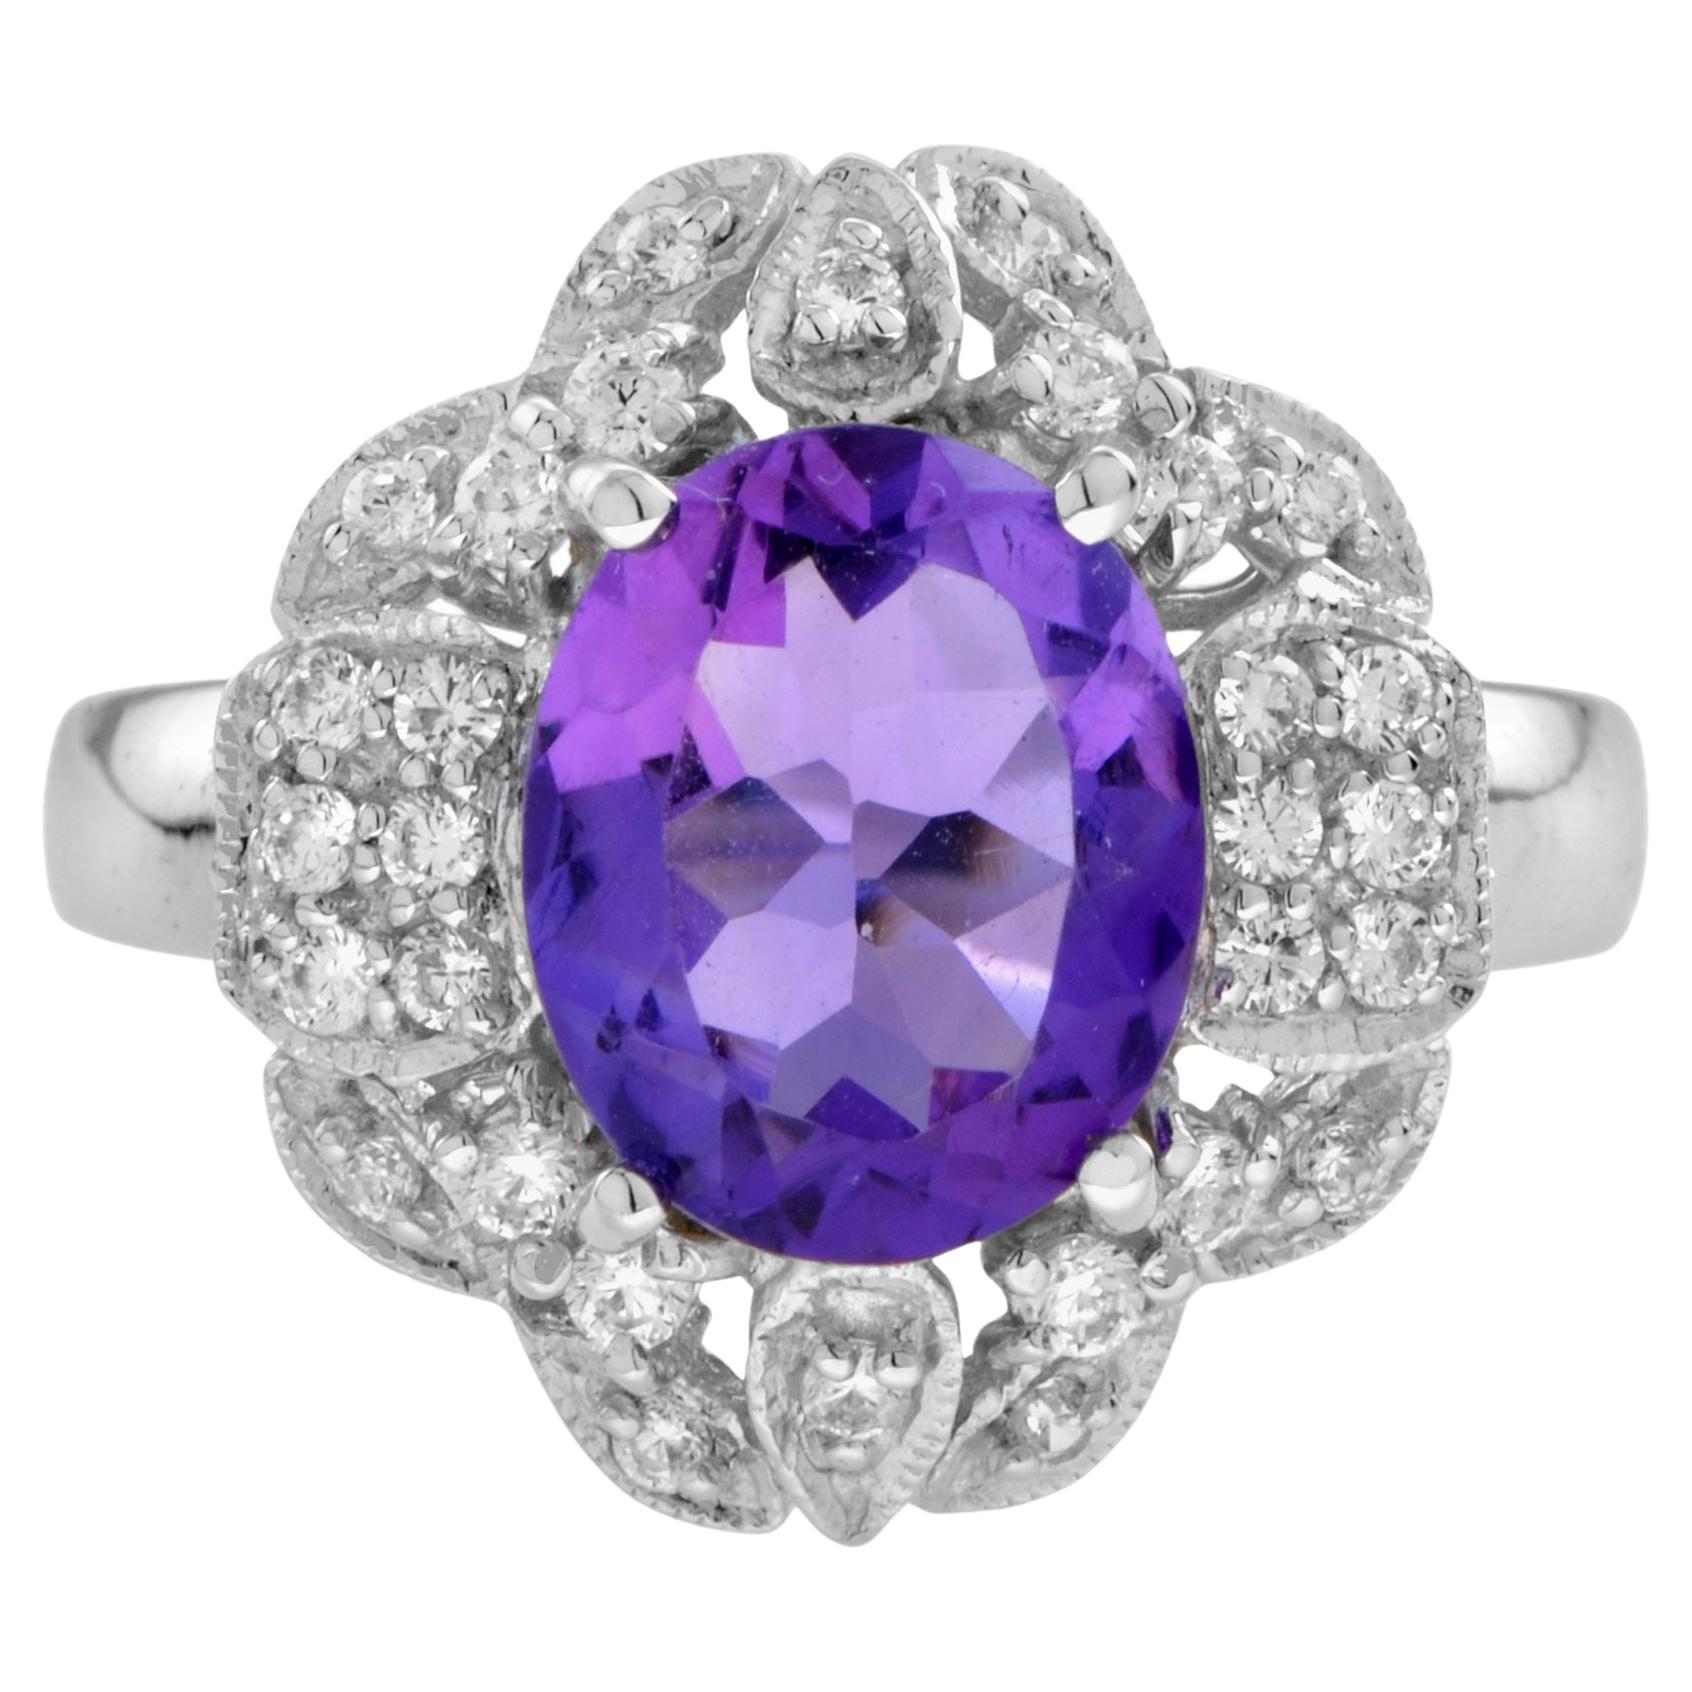 For Sale:  2.6 Ct. Amethyst and Diamond Halo Ring in 18K White Gold